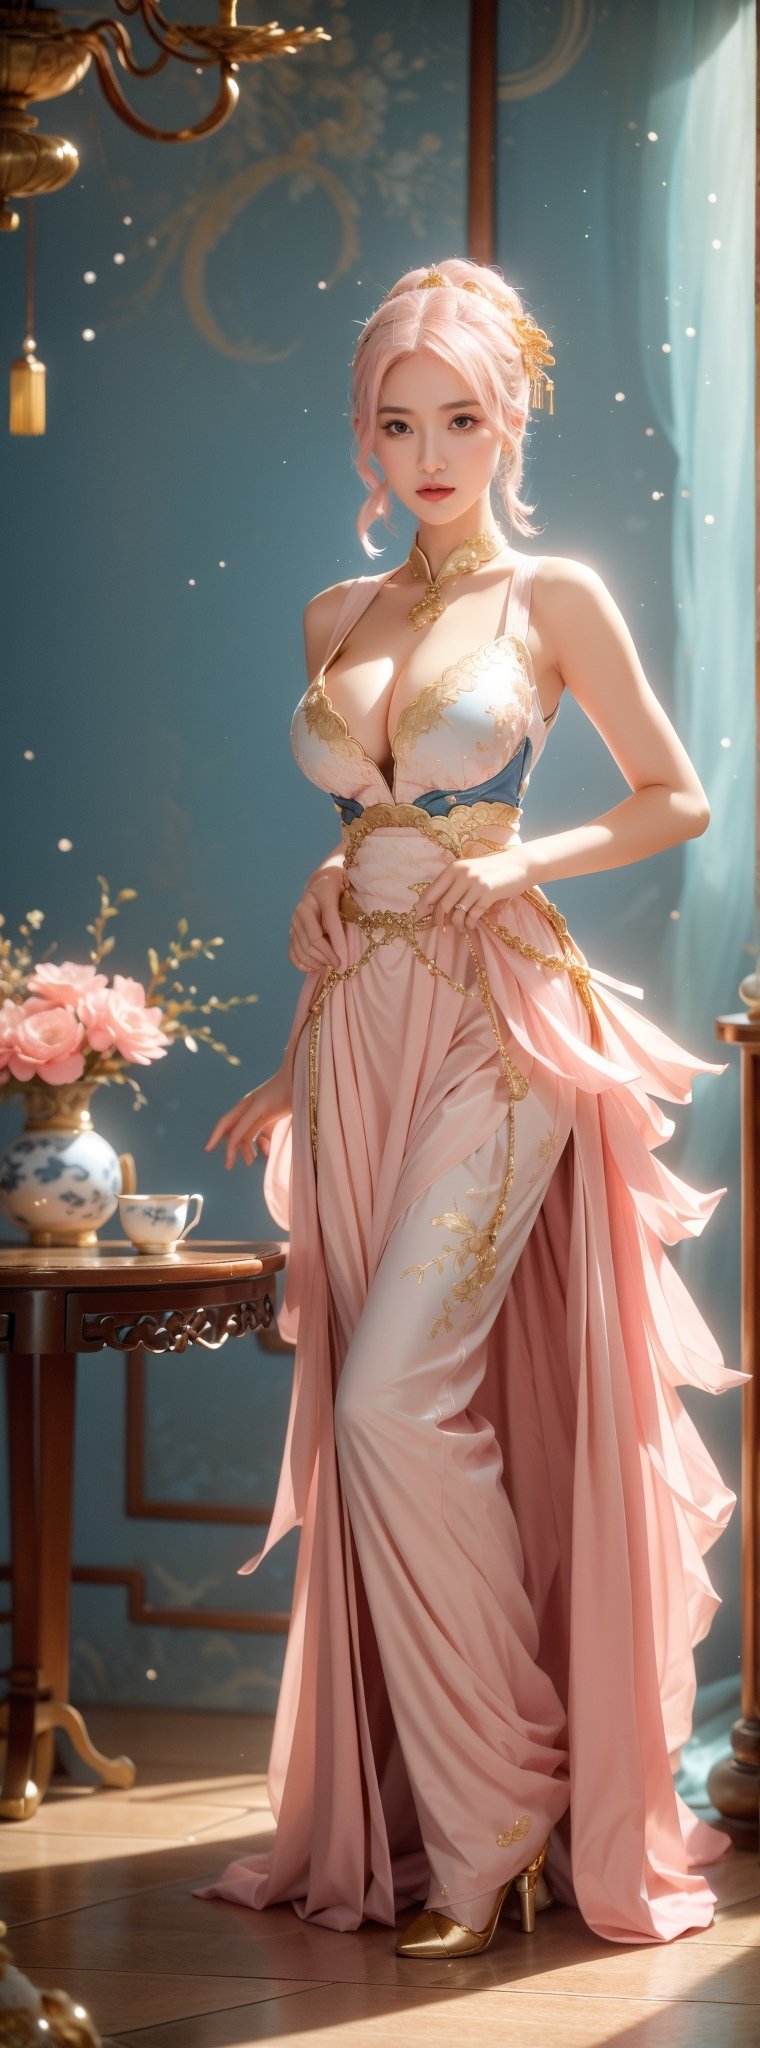 Ceramic material,((light pink hair)), beige gold tone, a 23-year-old Chinese beauty with an elegant and leisurely face, ((big natural breasts)),standing near a gorgeous single baroque sofa with a blue background and gold edges. Her outfit is predominantly white with navy blue trim and detailed with a detailed peony pattern. Her perfect long legs were exposed, and there was a blue and white porcelain teapot and teacup on the table next to the chair, indicating that this was a tea party. The floor beneath her feet was strewn with pearls and red beads. Directly behind the background is a gold-framed Chinese painting, and ornate interior decoration surrounds the central figure, adding to the luxurious feel of the scene.,pastelbg